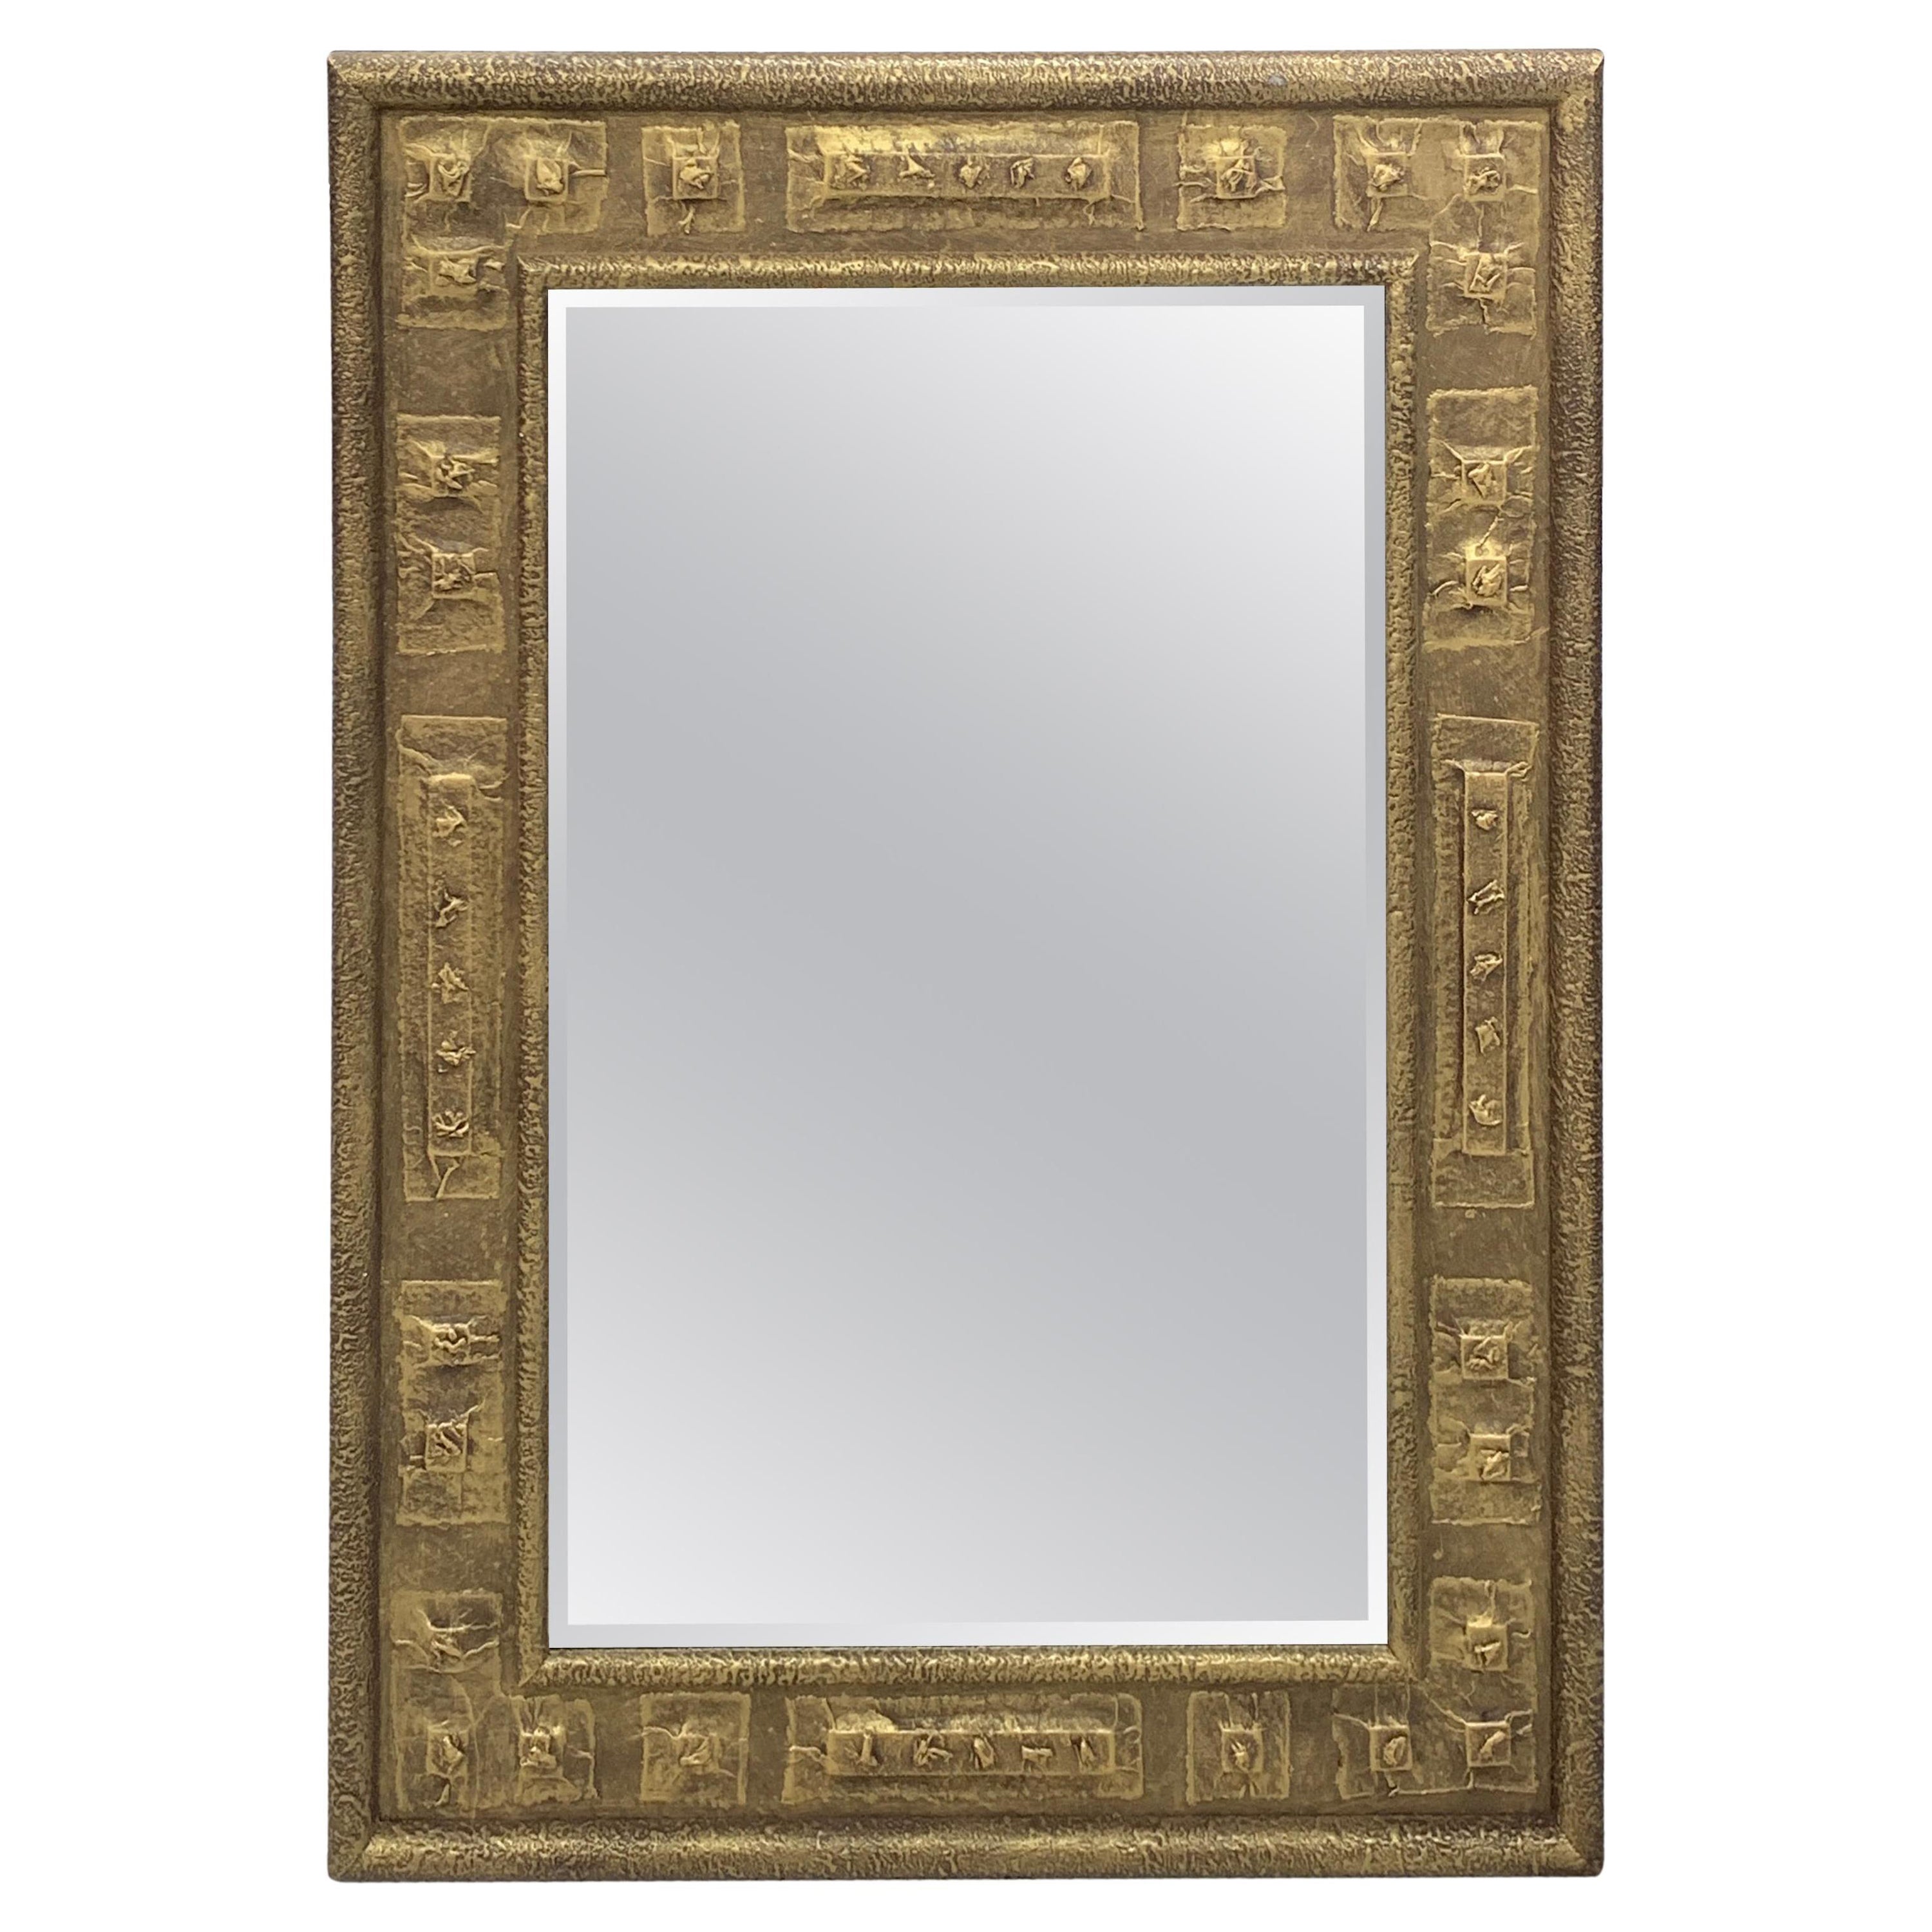 Gilt Brutalist Mirror, by Harris Strong